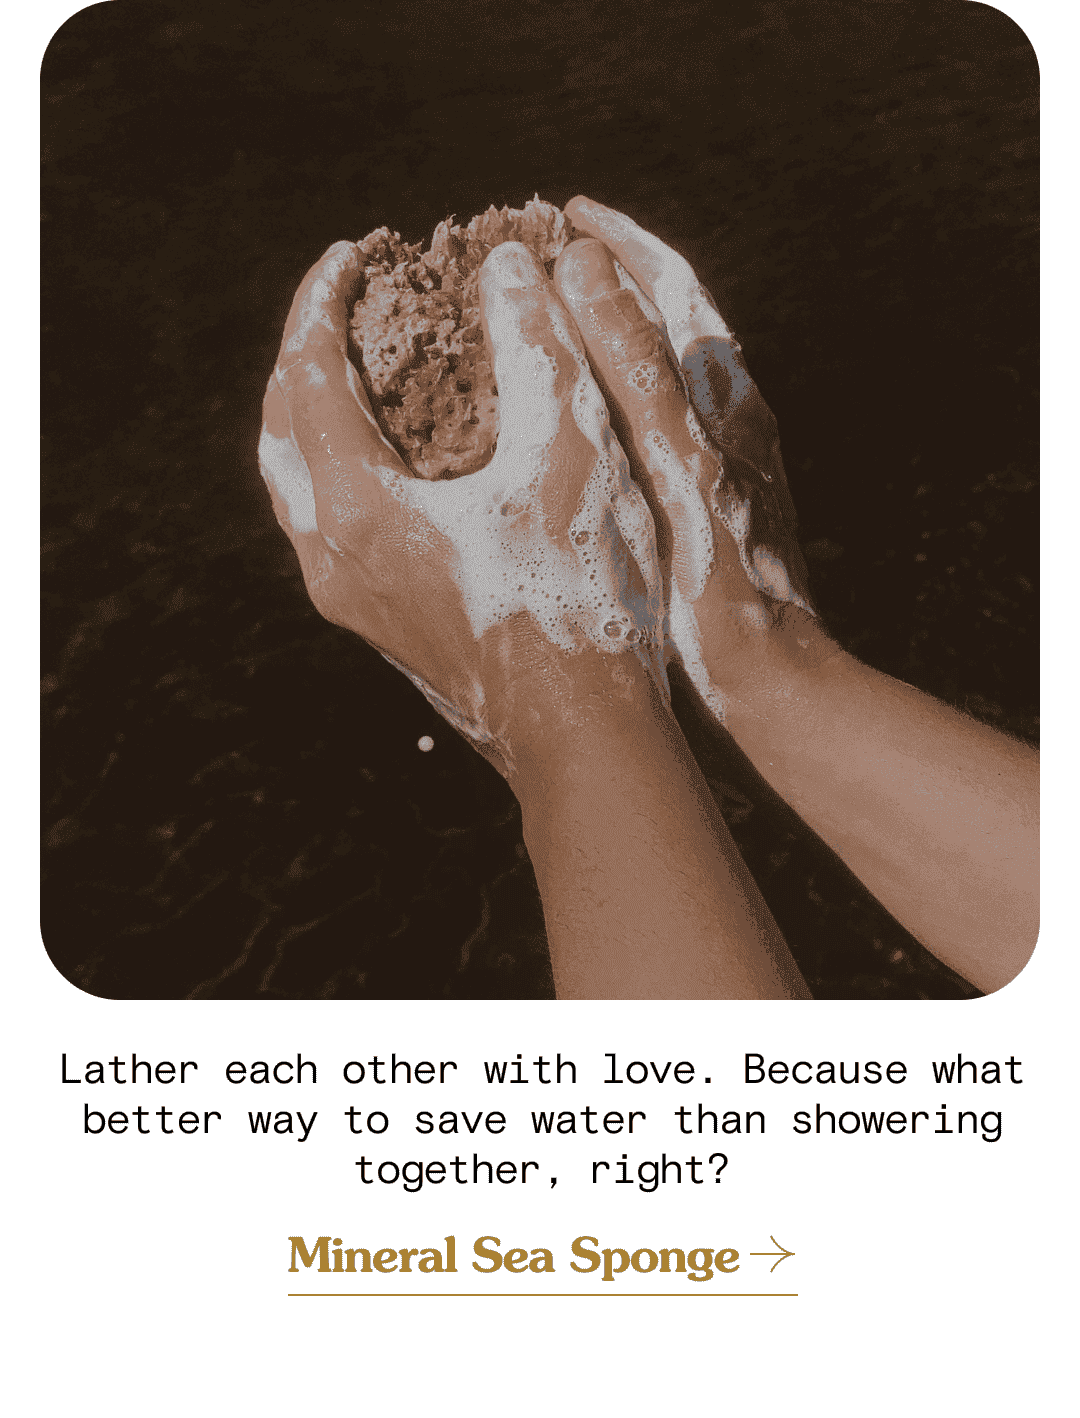 Lather each other with love. Because what better way to save water than showering together, right? Mineral Sea Sponge